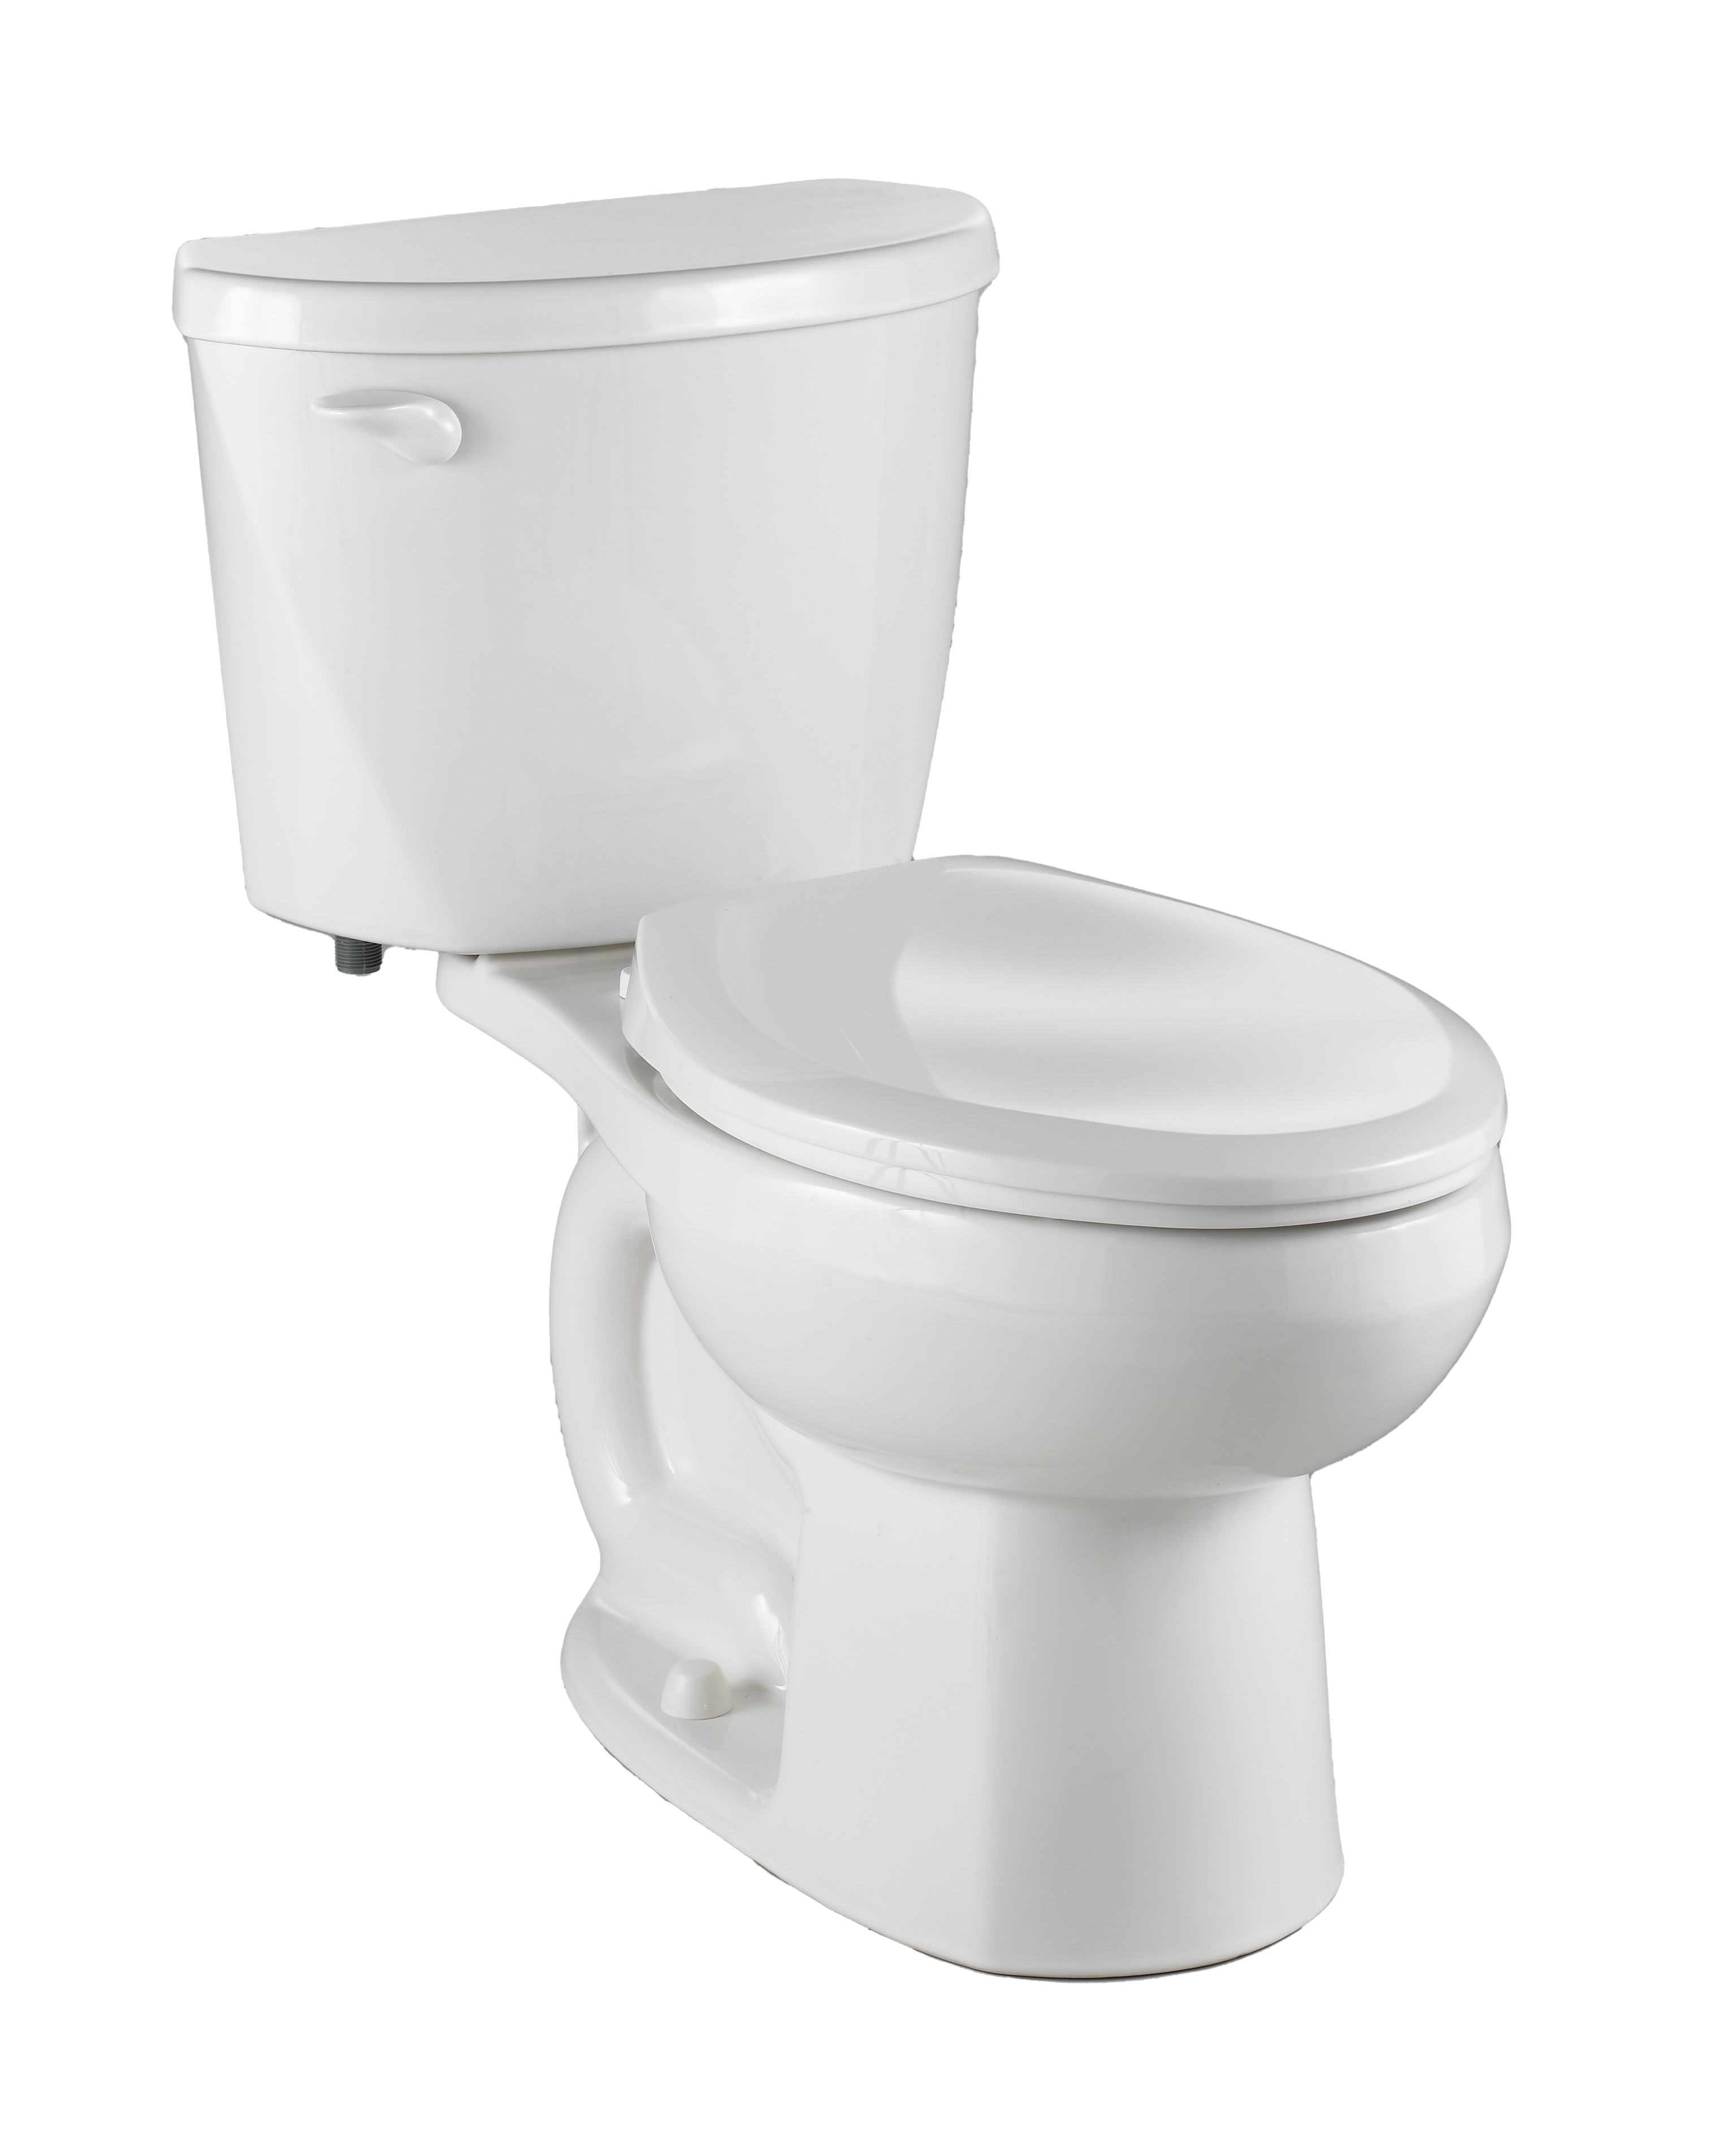 Evolution 2 Two-Piece 1.28 gpf/4.8 Lpf Chair Height Elongated Toilet Less Seat